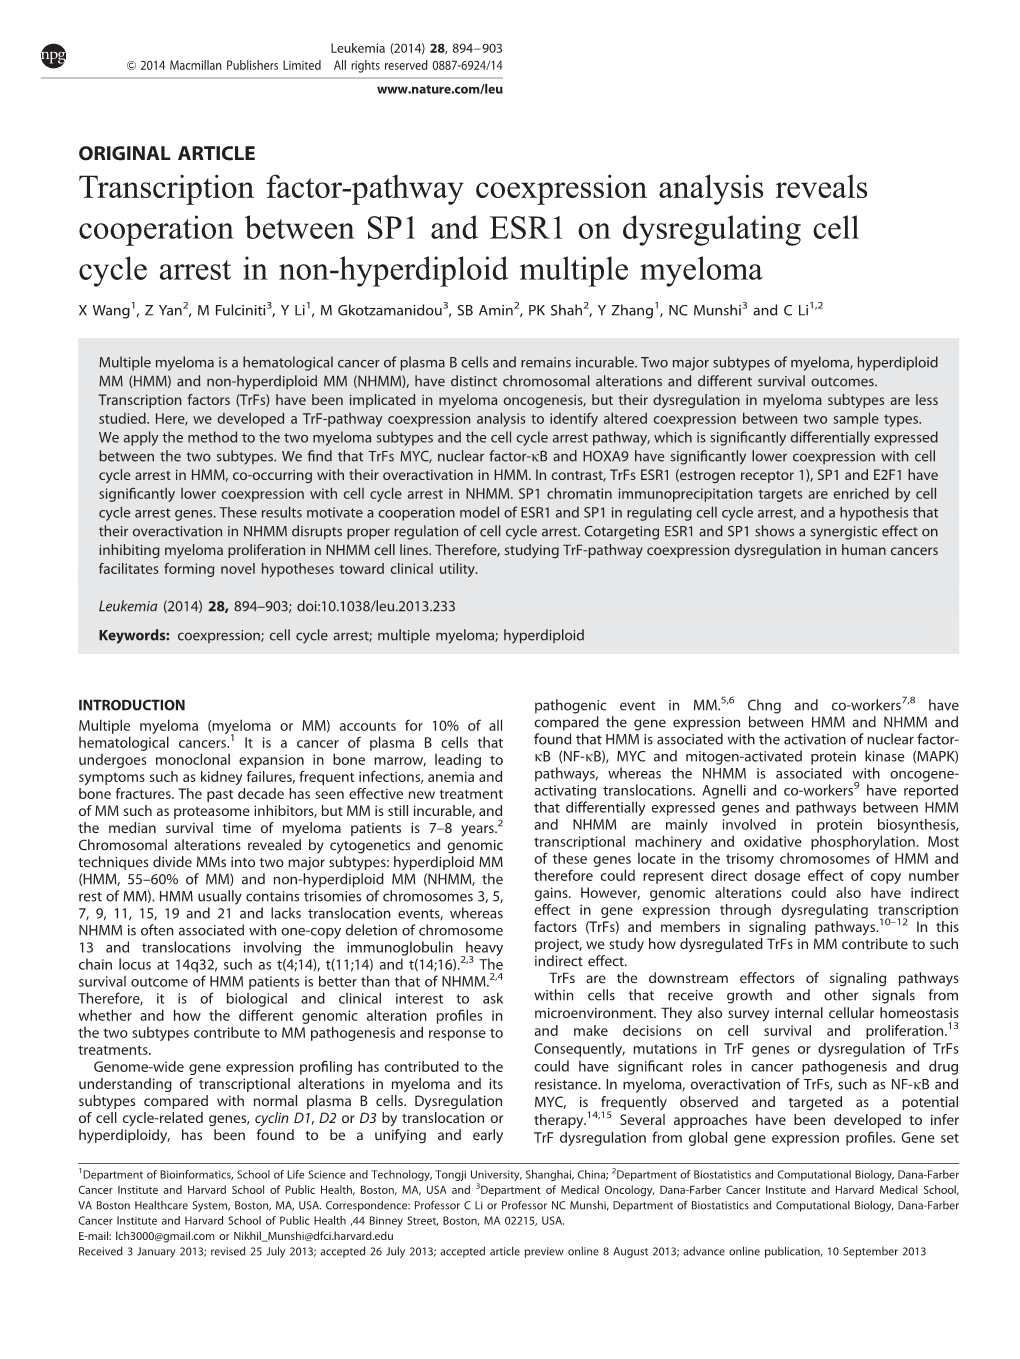 Transcription Factor-Pathway Coexpression Analysis Reveals Cooperation Between SP1 and ESR1 on Dysregulating Cell Cycle Arrest in Non-Hyperdiploid Multiple Myeloma